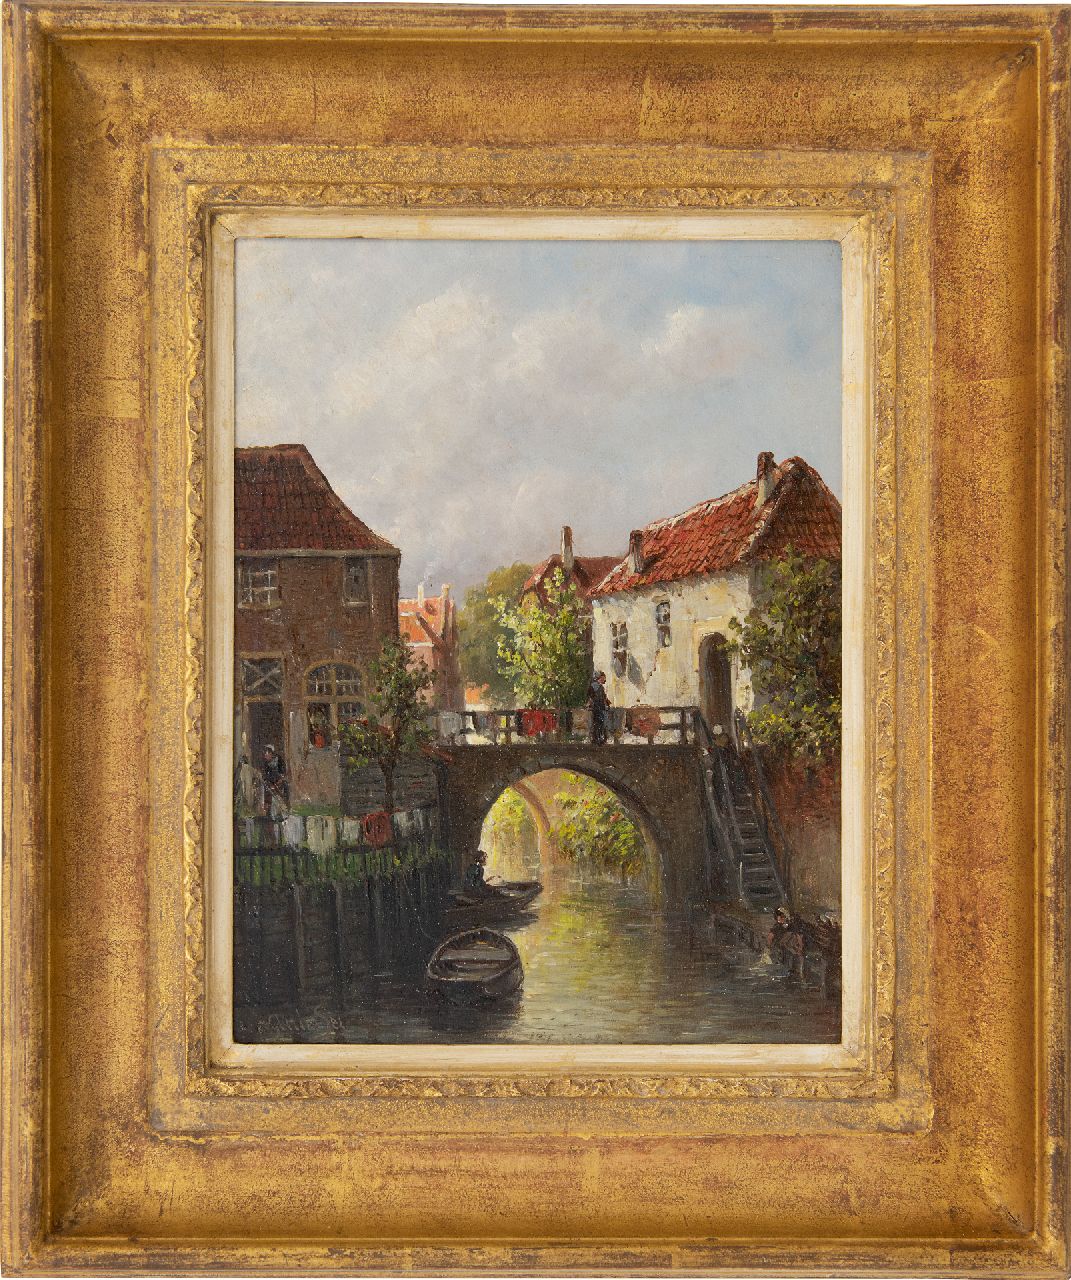 Vertin P.G.  | Petrus Gerardus Vertin, Drying laundry on the river Dieze, Den Bosch, oil on panel 24.2 x 18.7 cm, signed l.l. and dated '84